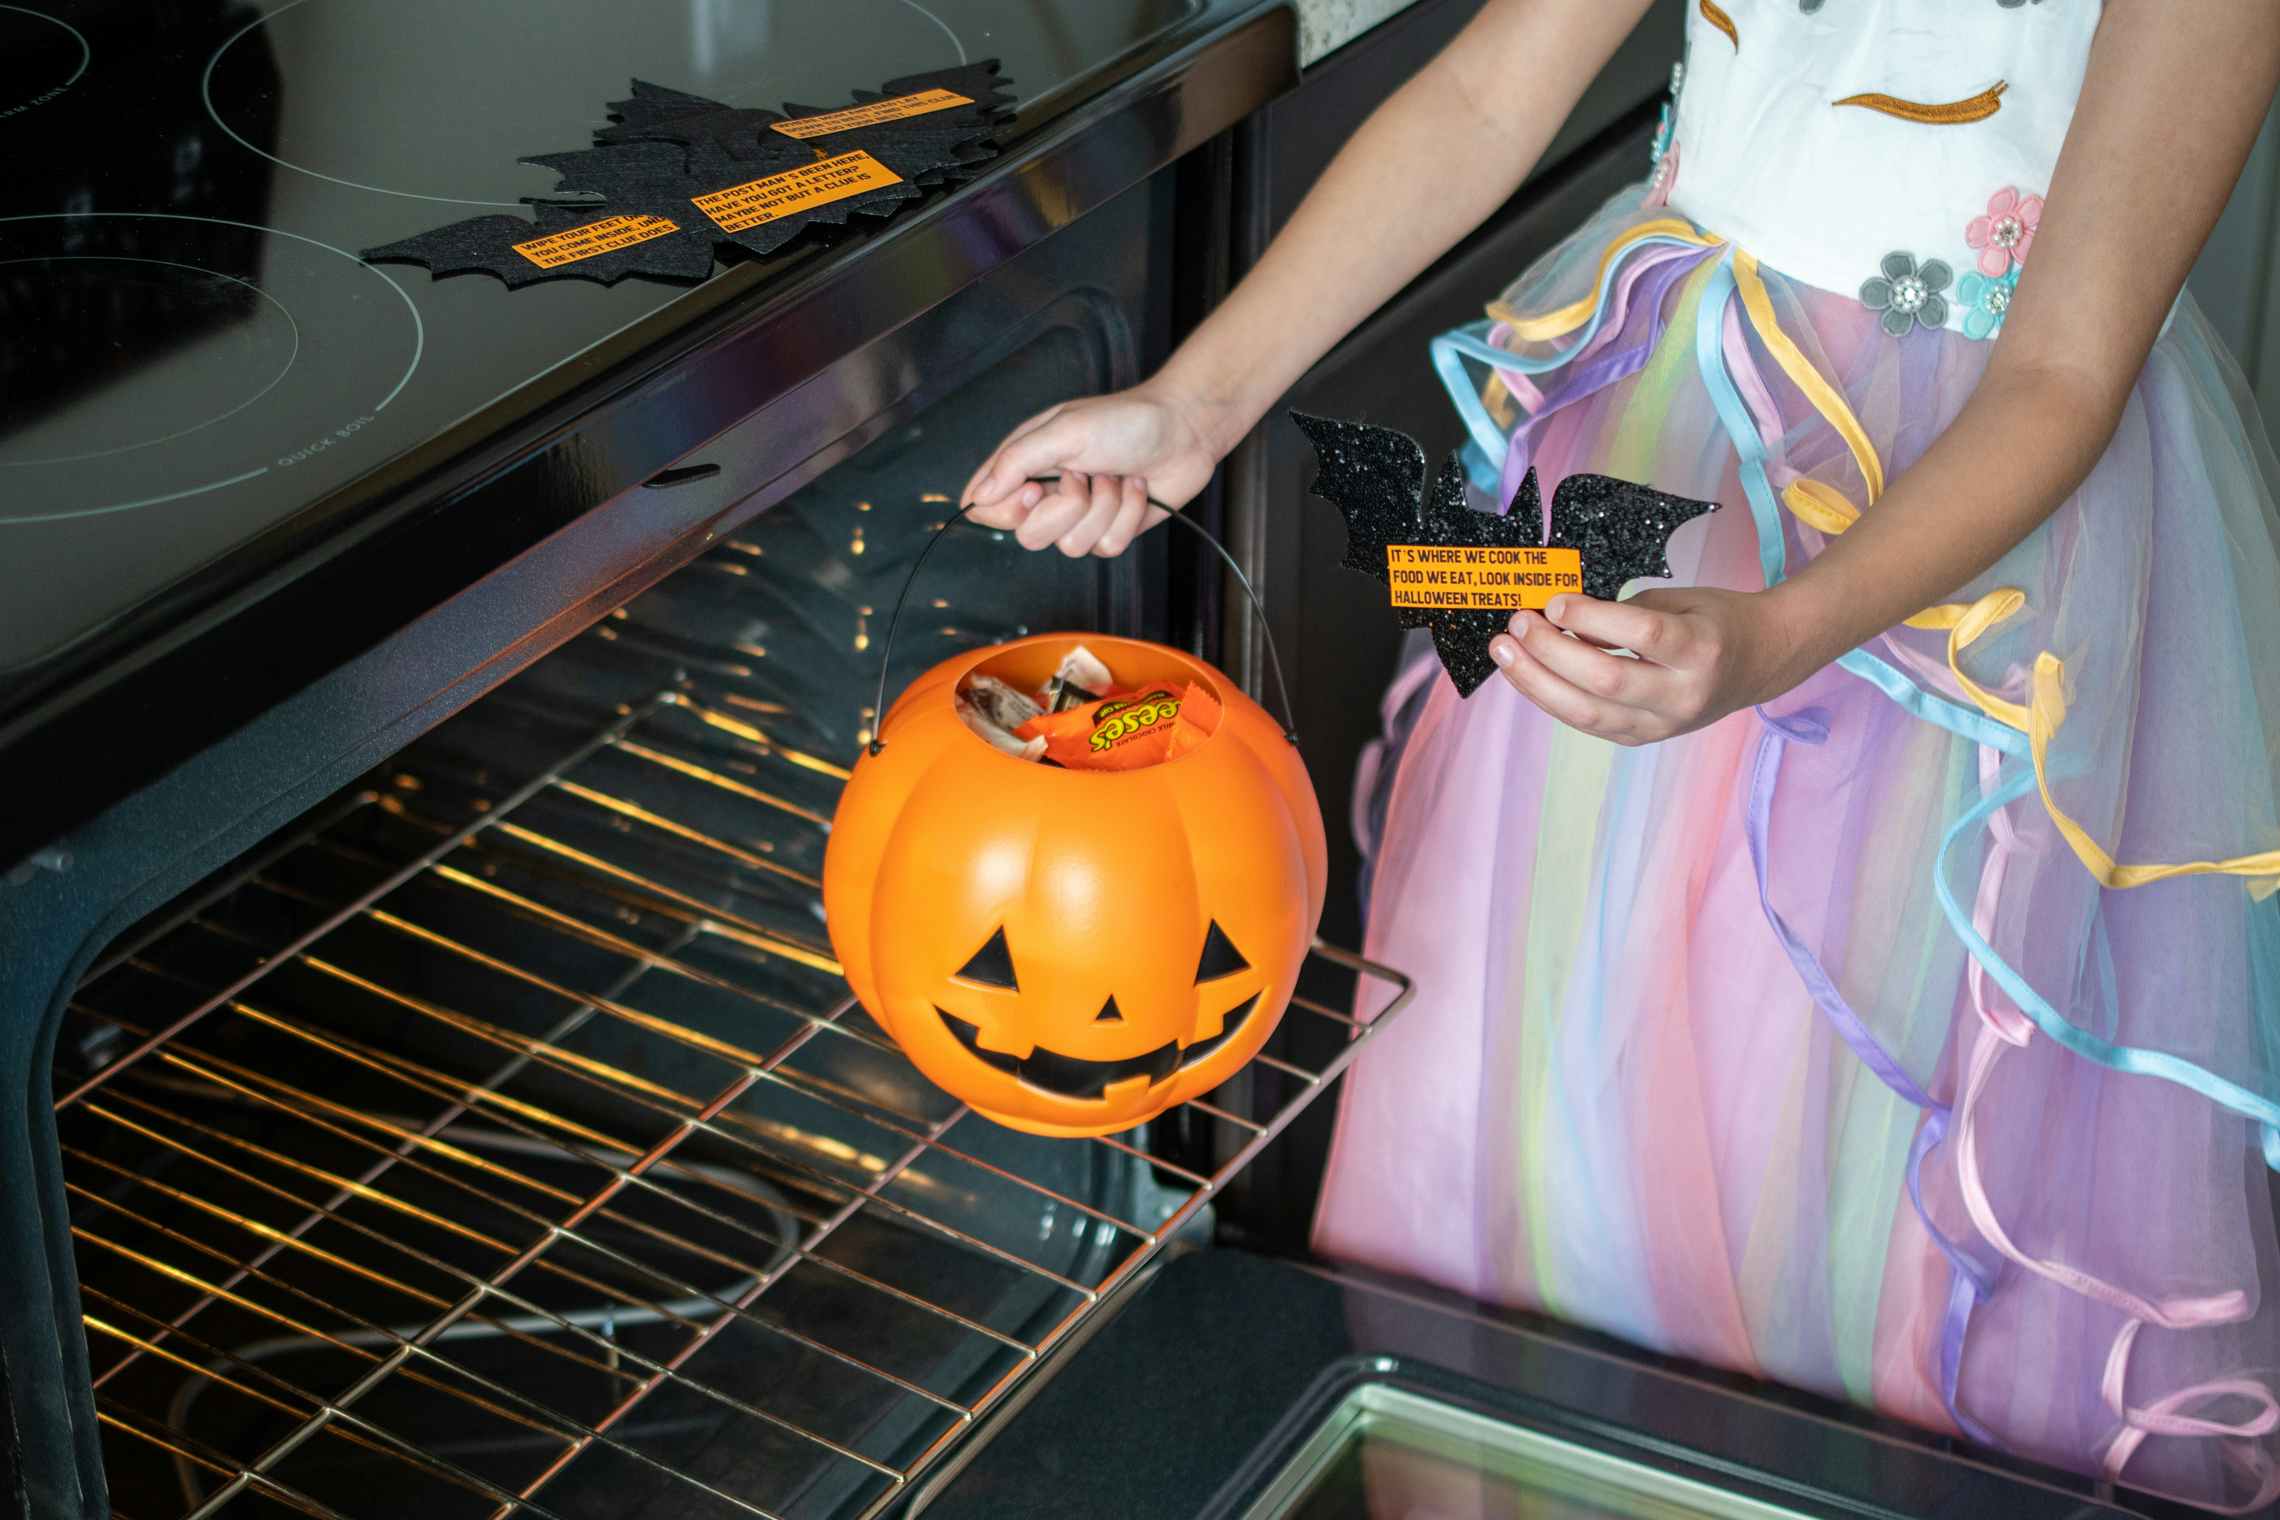 A little girl holding a scavenger hunt clue and pulling a pumpkin pail filled with candy from an oven